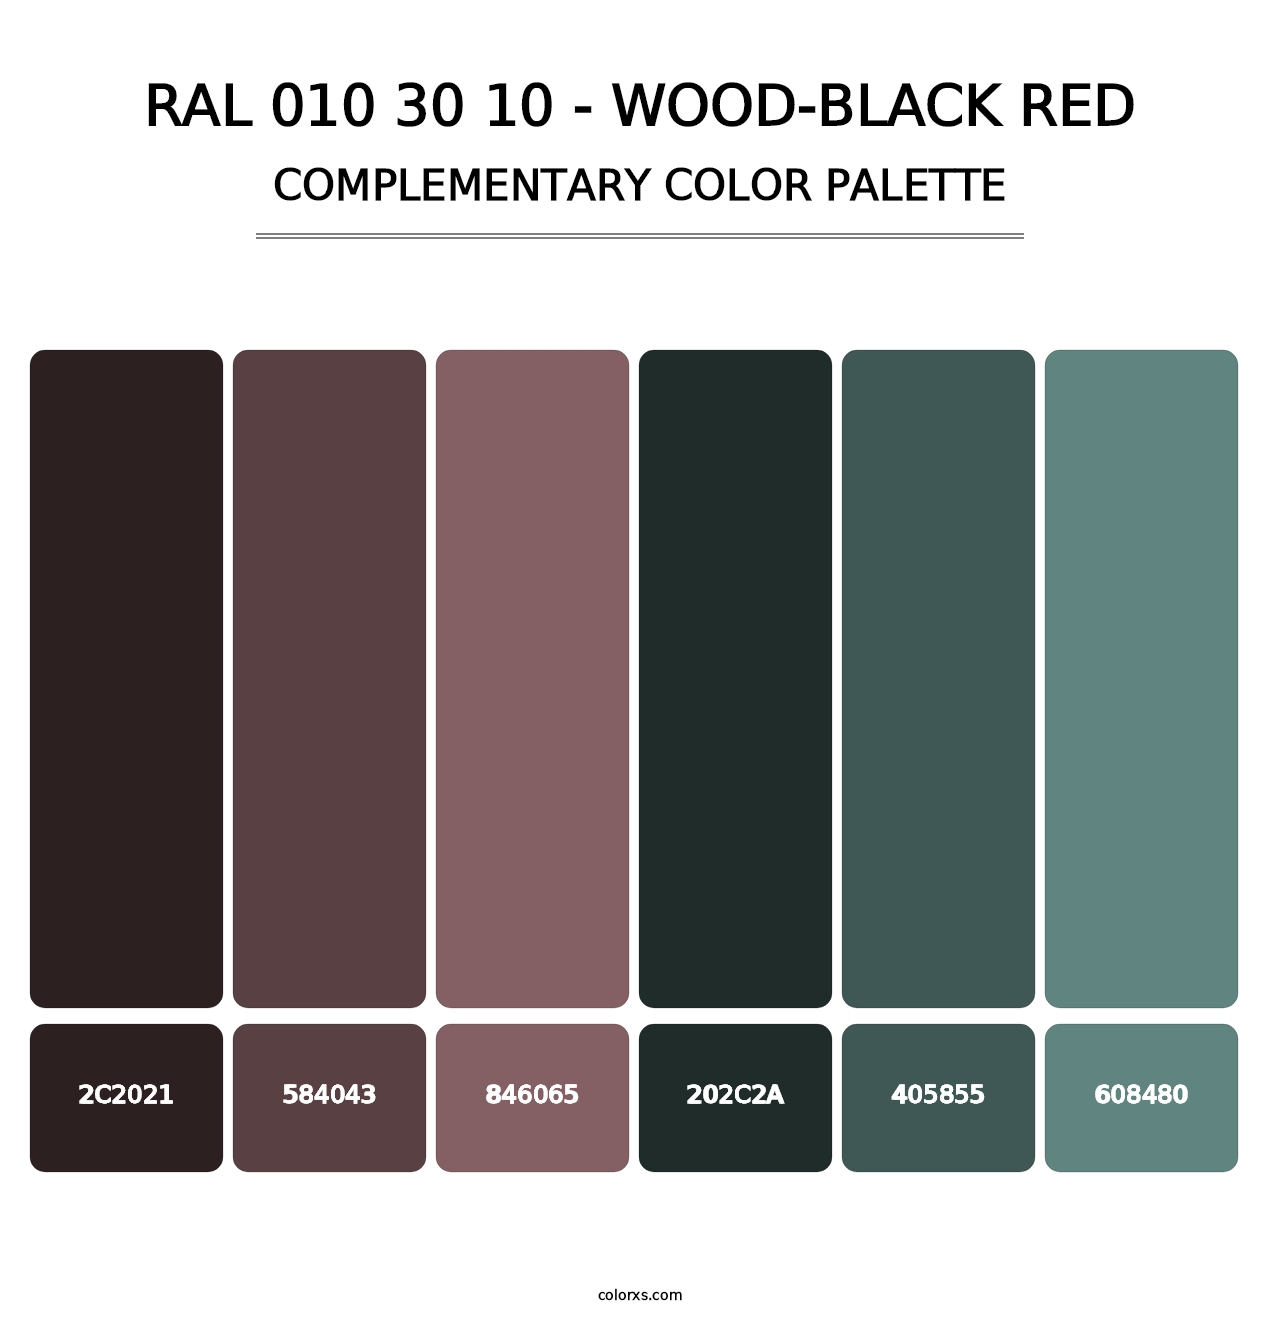 RAL 010 30 10 - Wood-Black Red - Complementary Color Palette